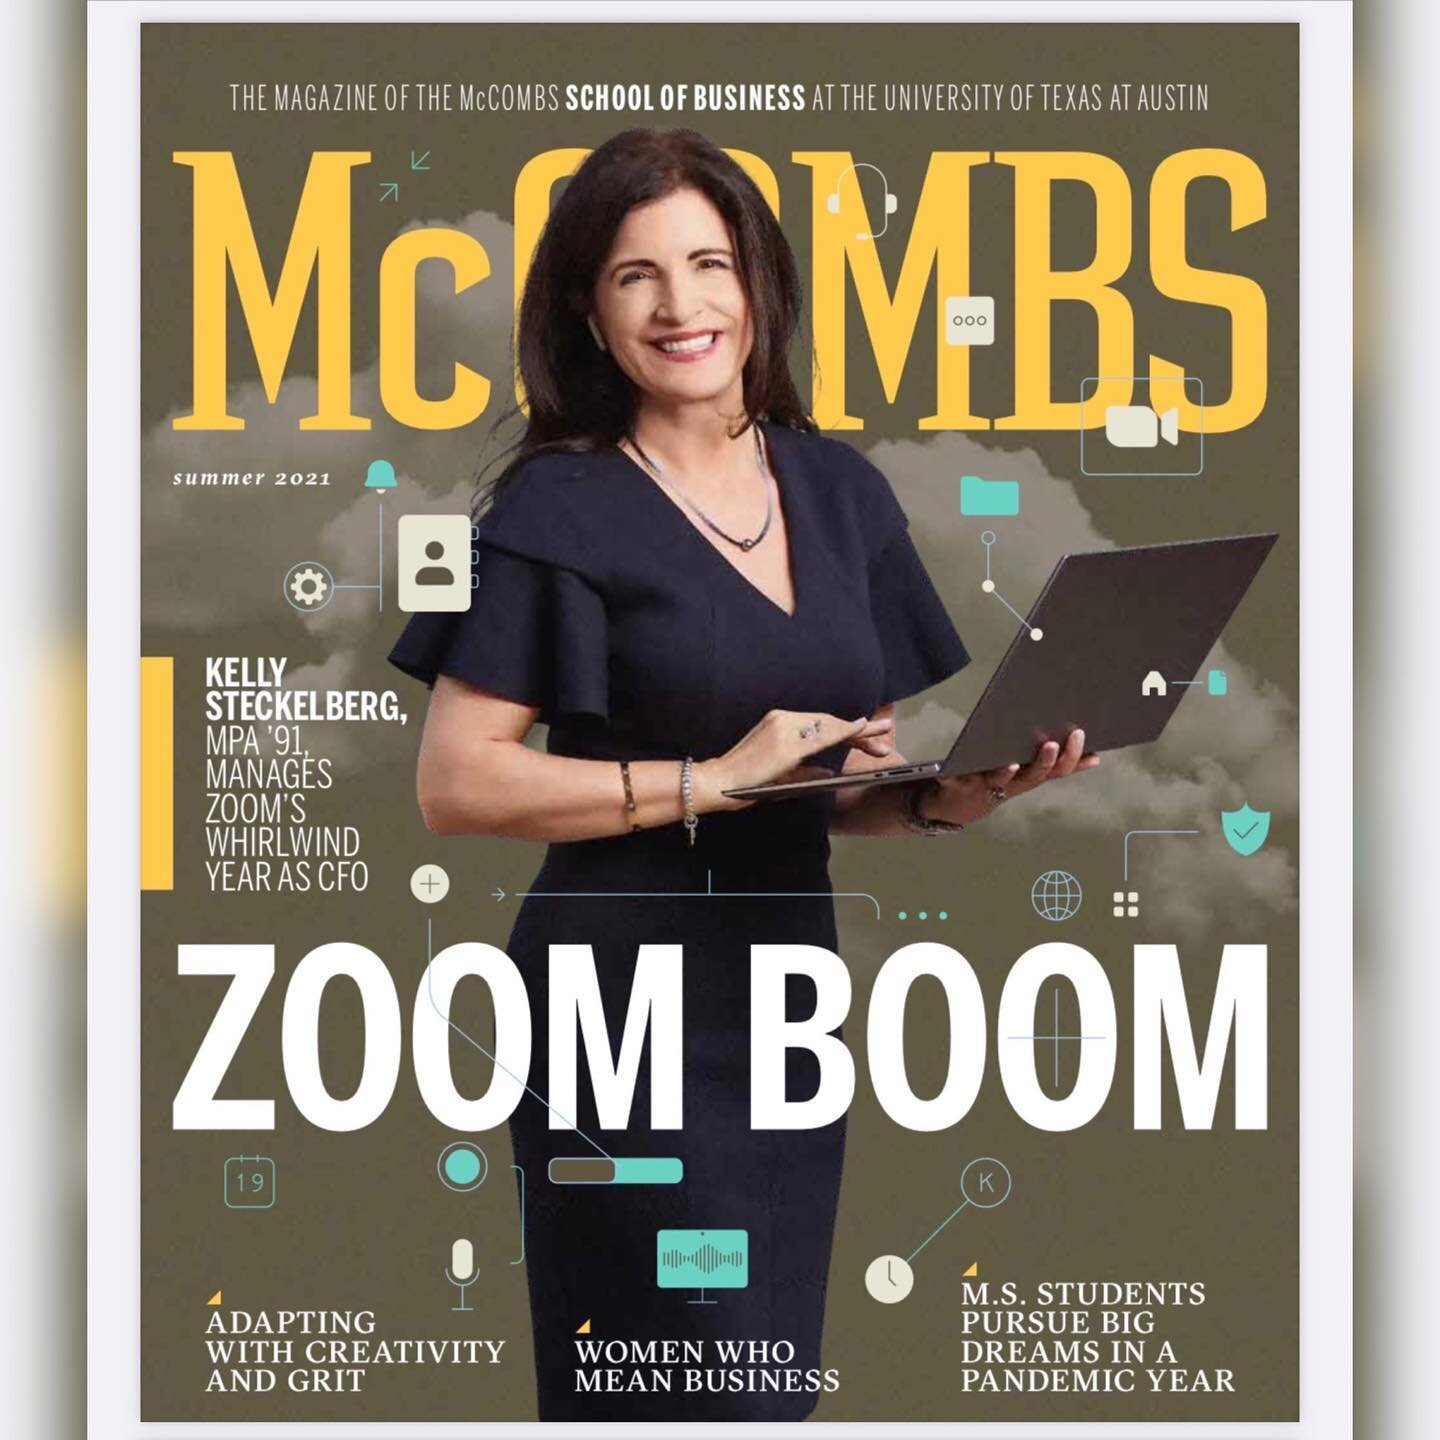 Mujeres, for those of you that don't follow the #MujeresOnTheRise community on LinkedIn (which you totally should!) - I wanted to share that I was featured on the @utexasmccombs magazine (swipe to see the story). 🎉

Muchisimas gracias for letting me